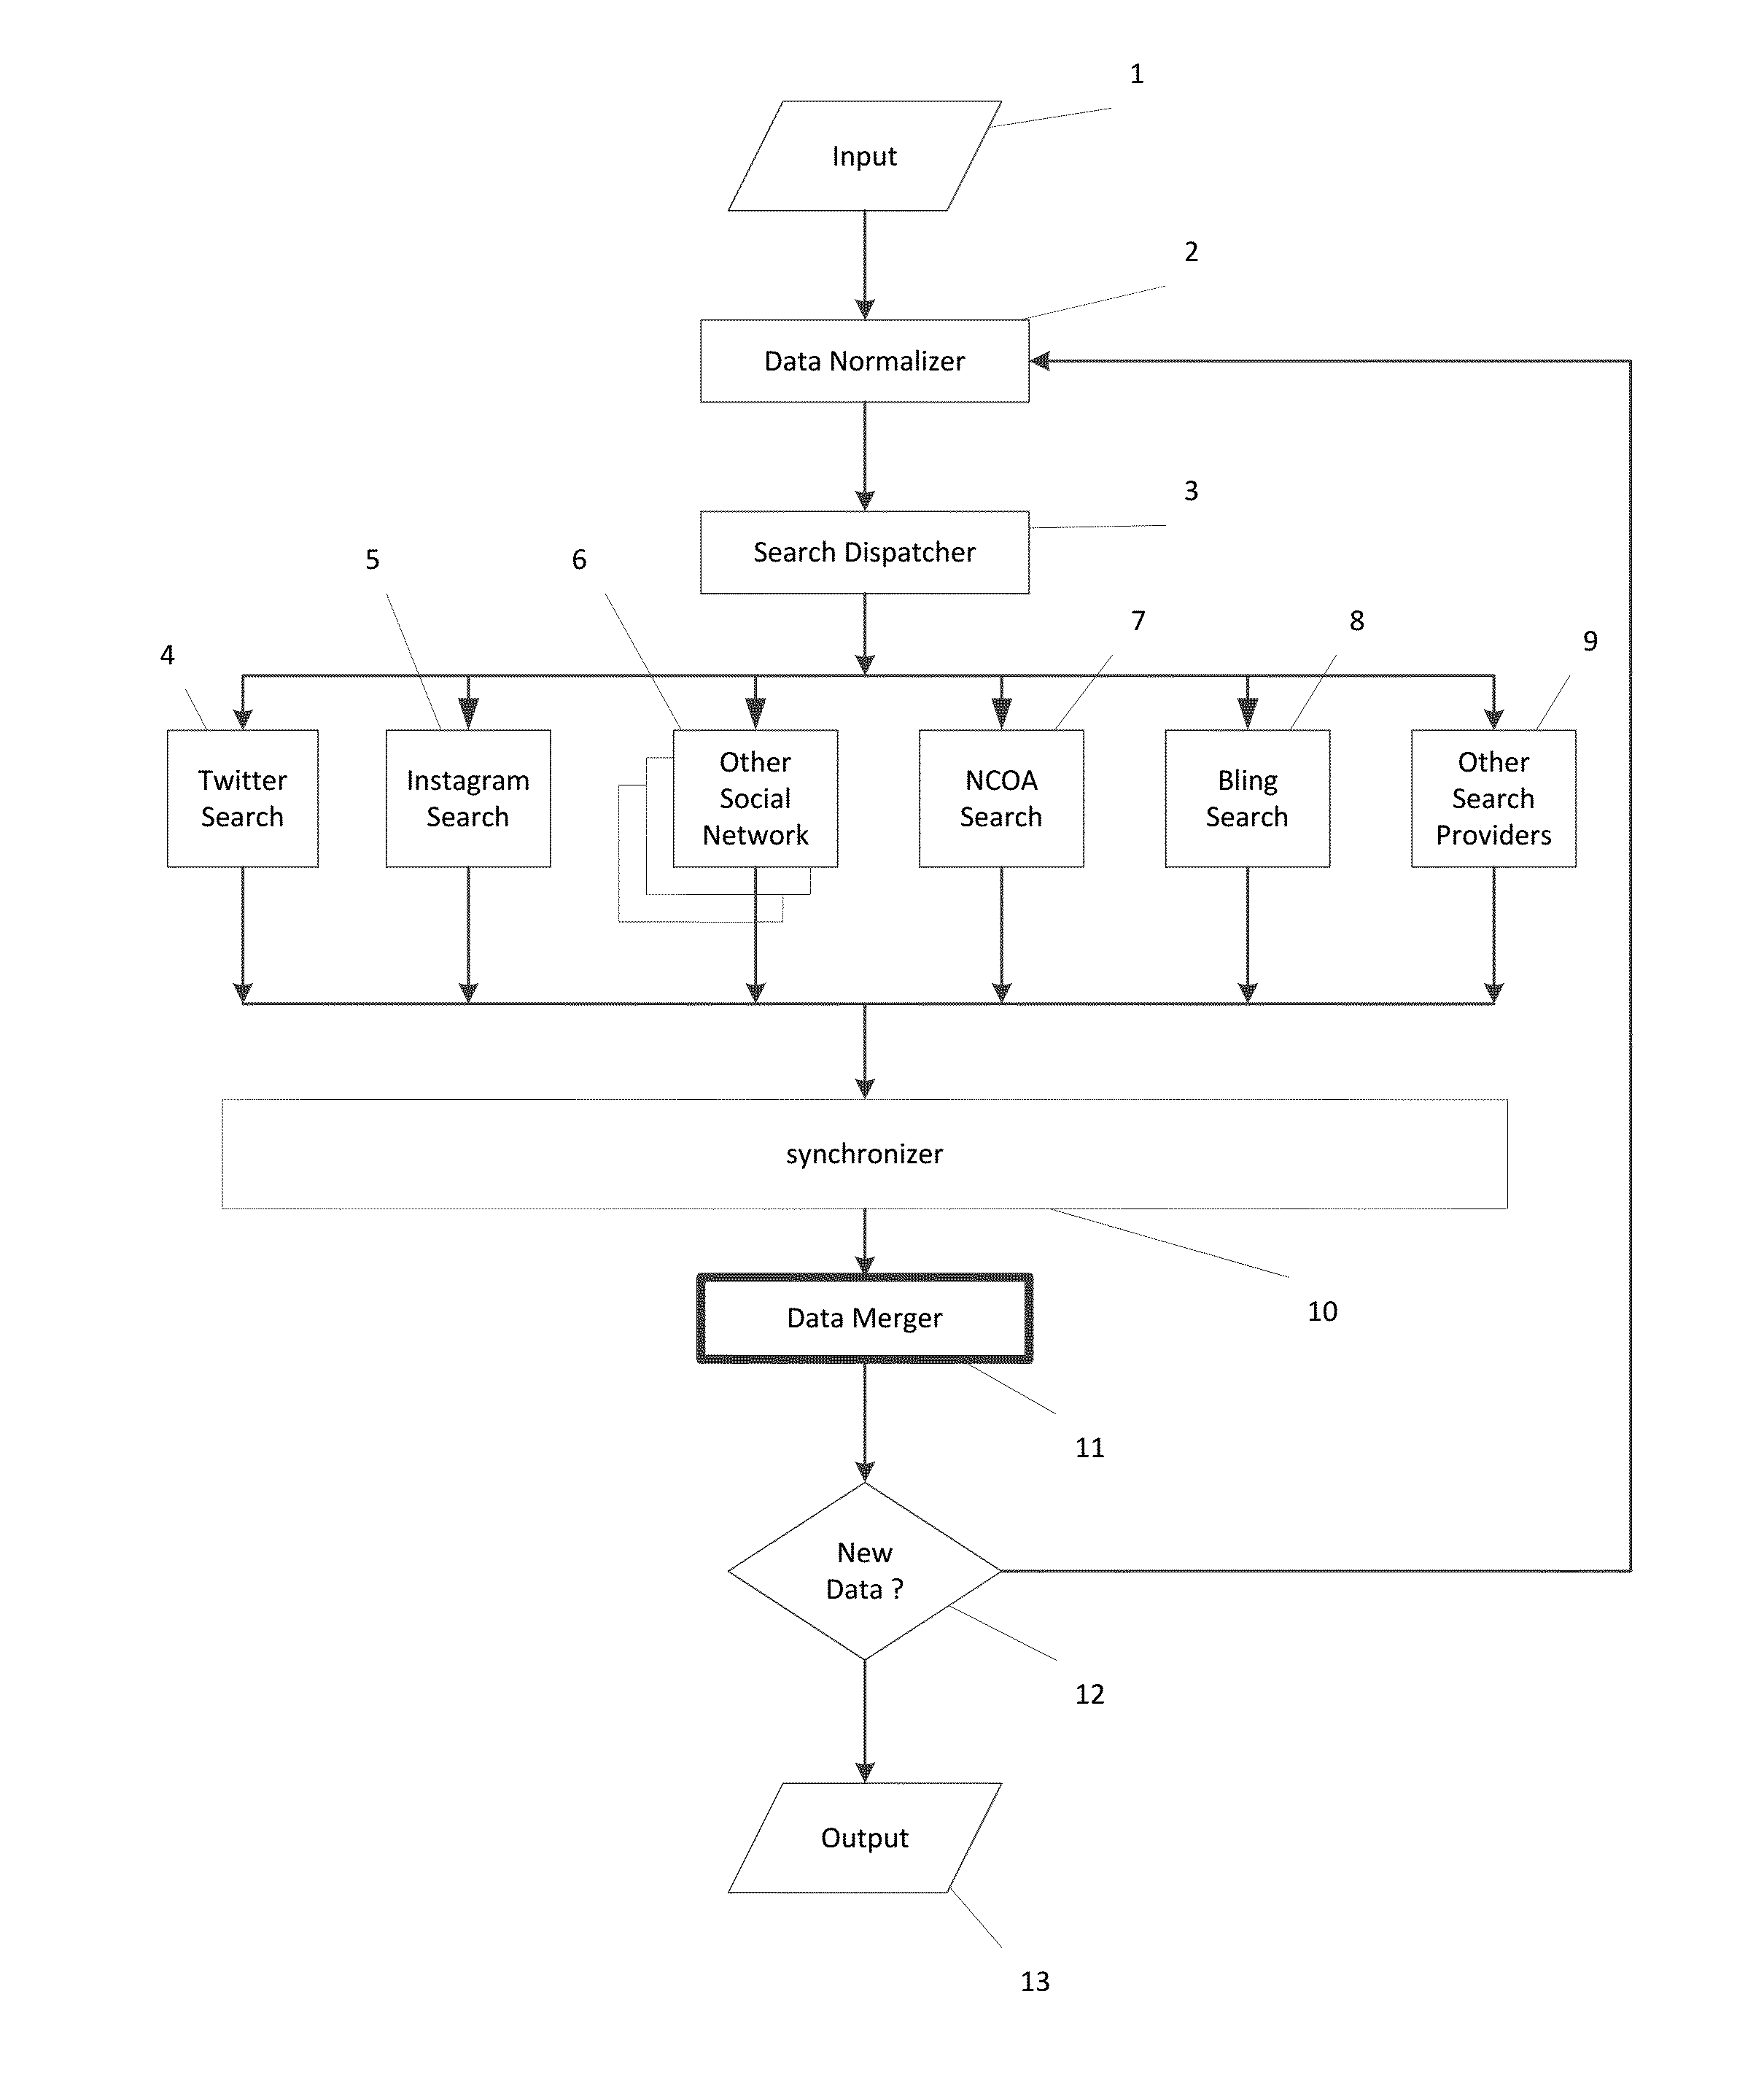 Method and system of using image recognition and geolocation signal analysis in the construction of a social media user identity graph